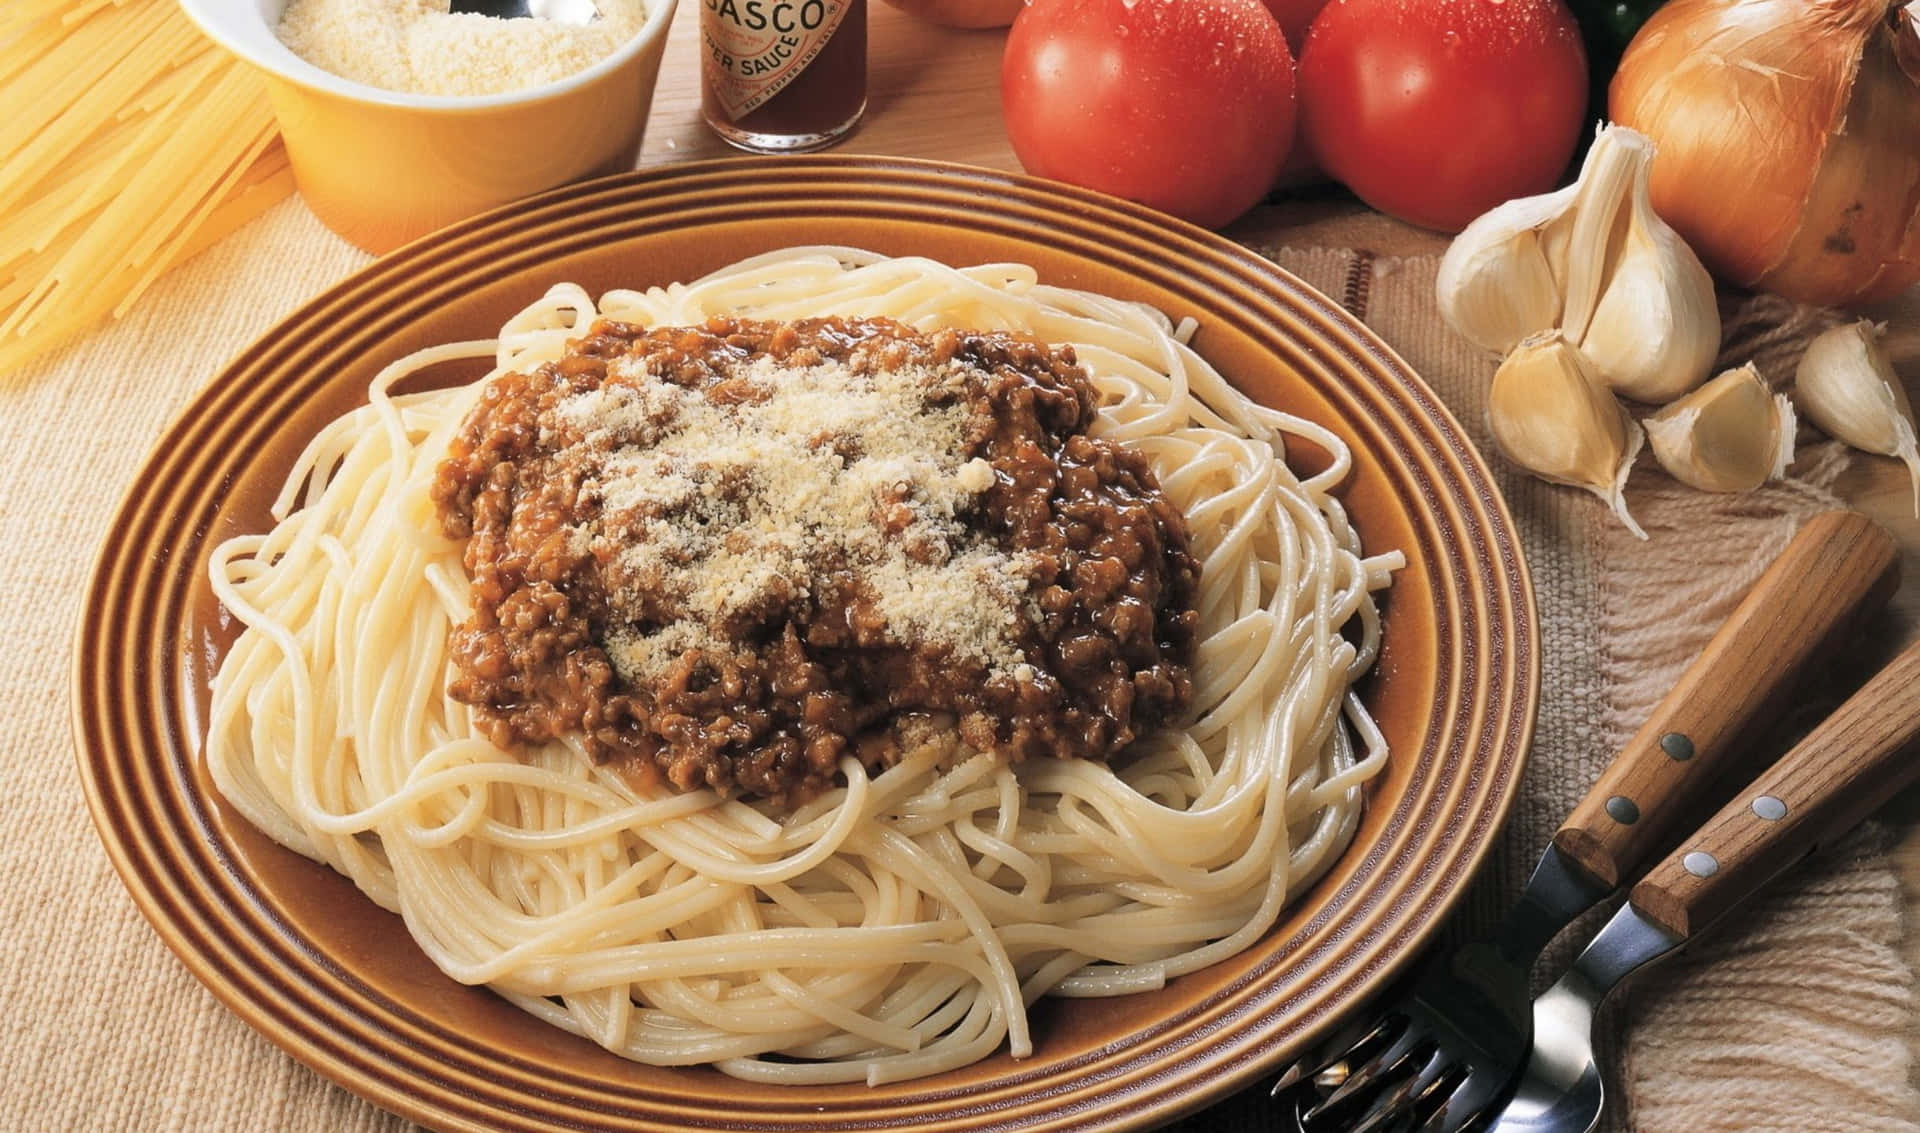 A Plate Of Spaghetti With Meat Sauce And Vegetables